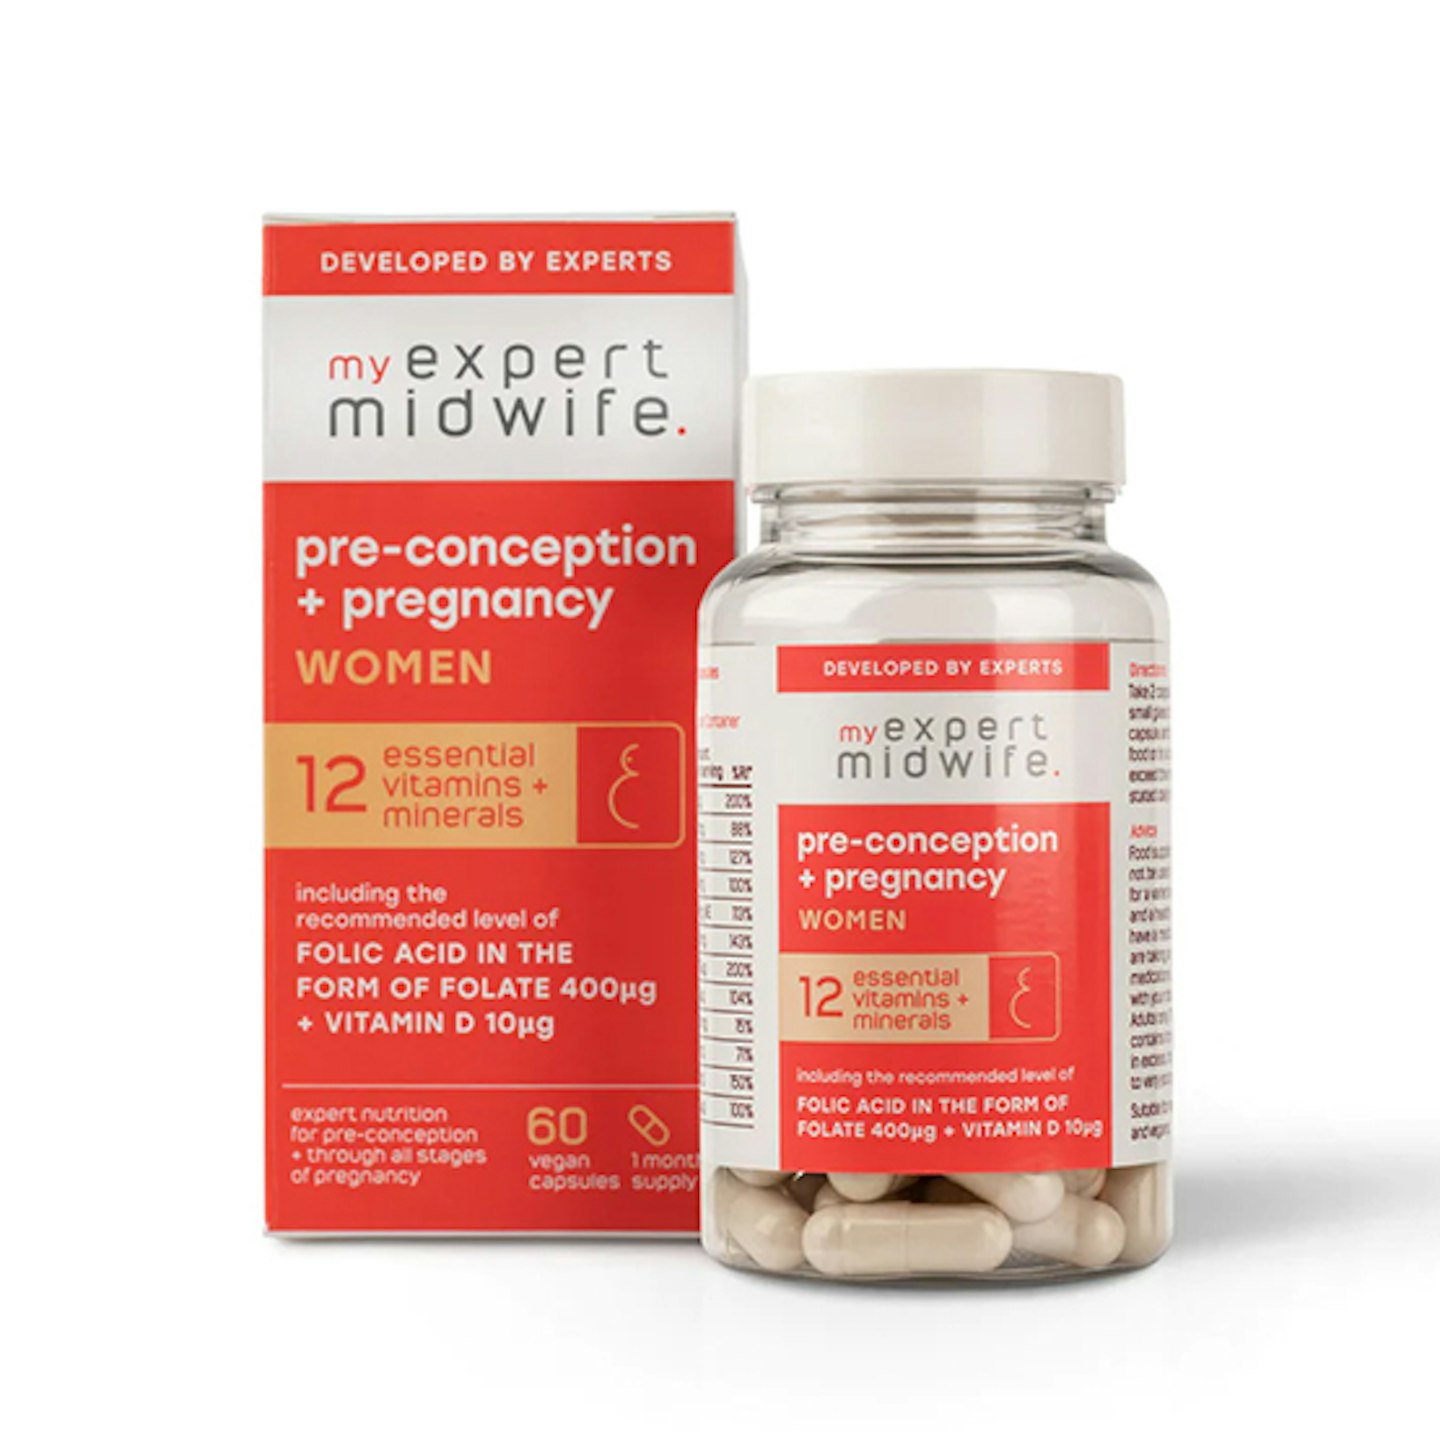 My Expert Midwife supplements